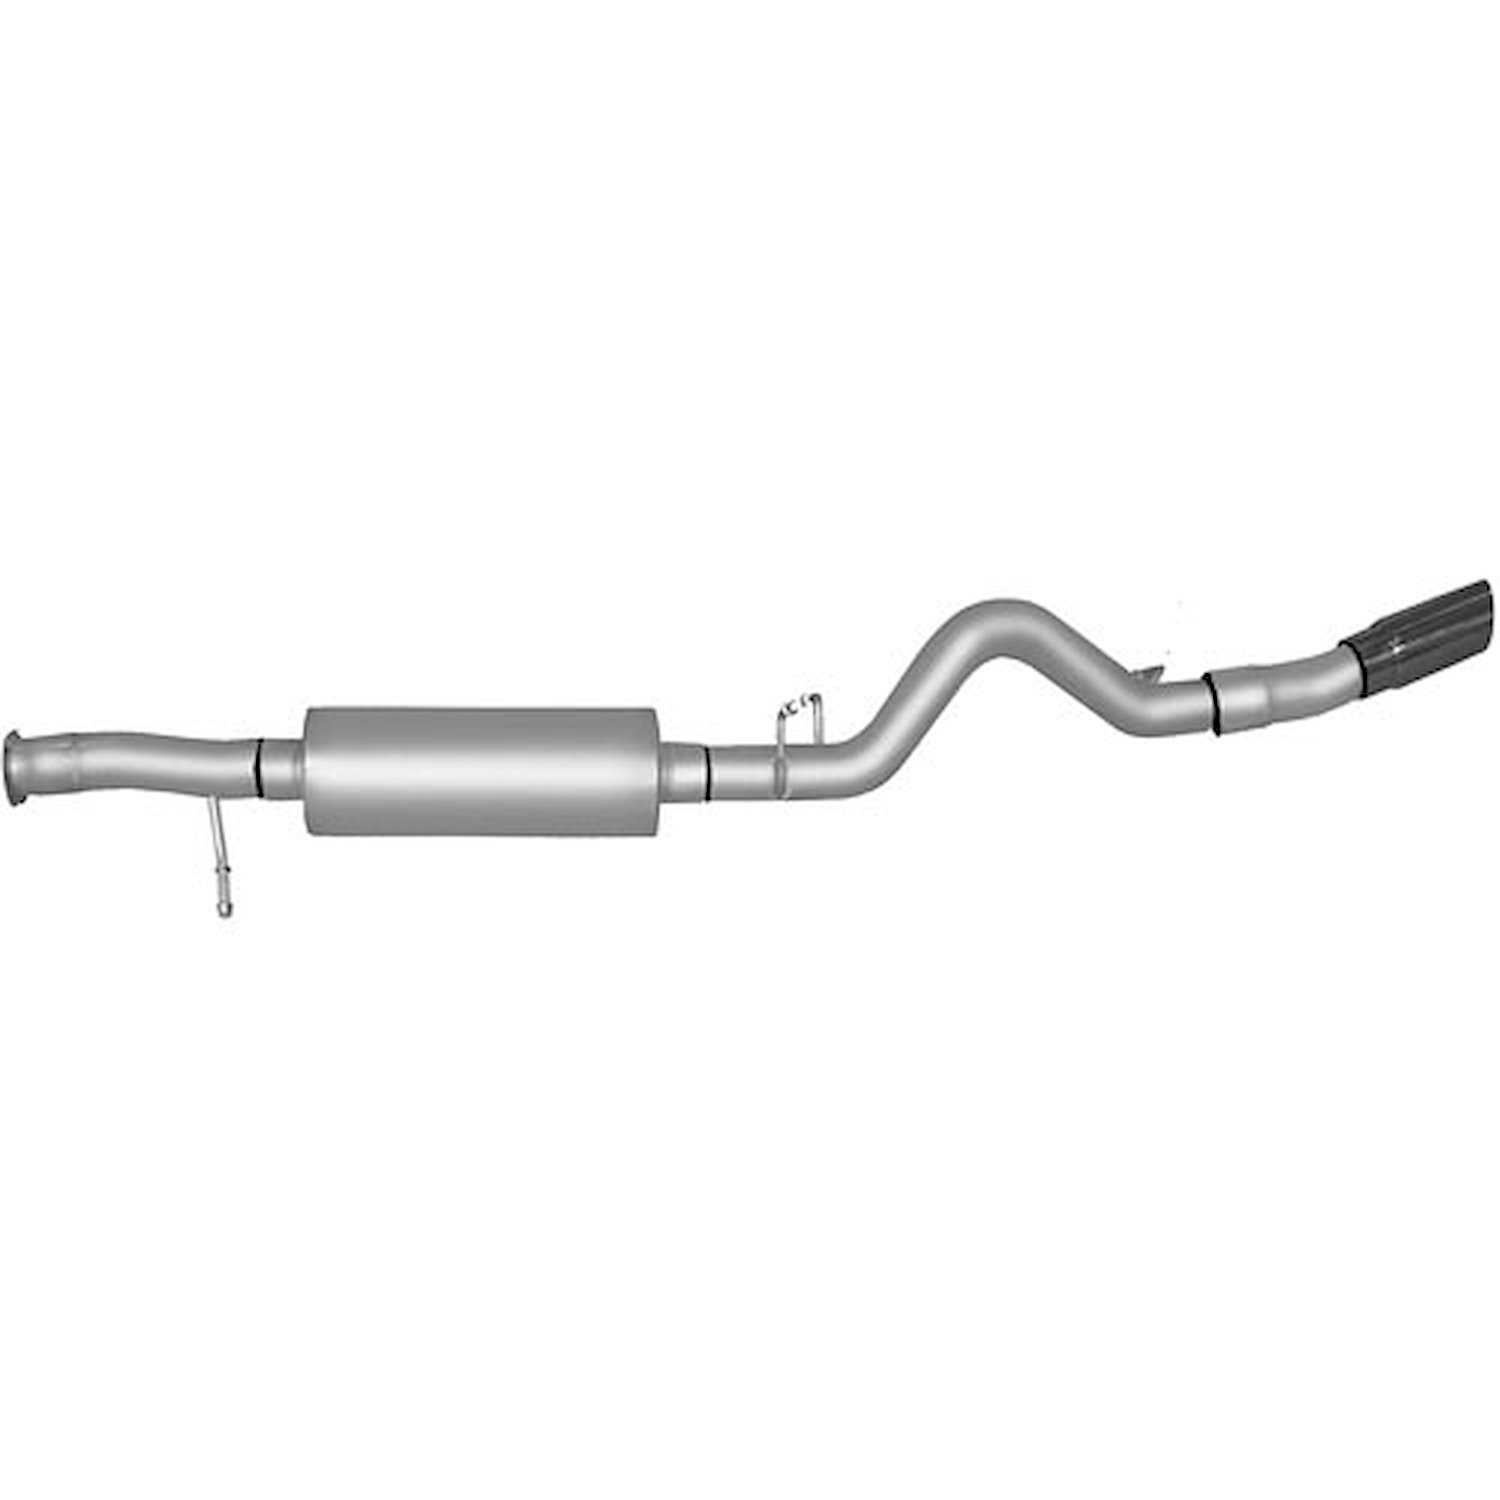 Swept-Side Cat-Back Exhaust 2011-15 Cadillac Escalade 6.2L